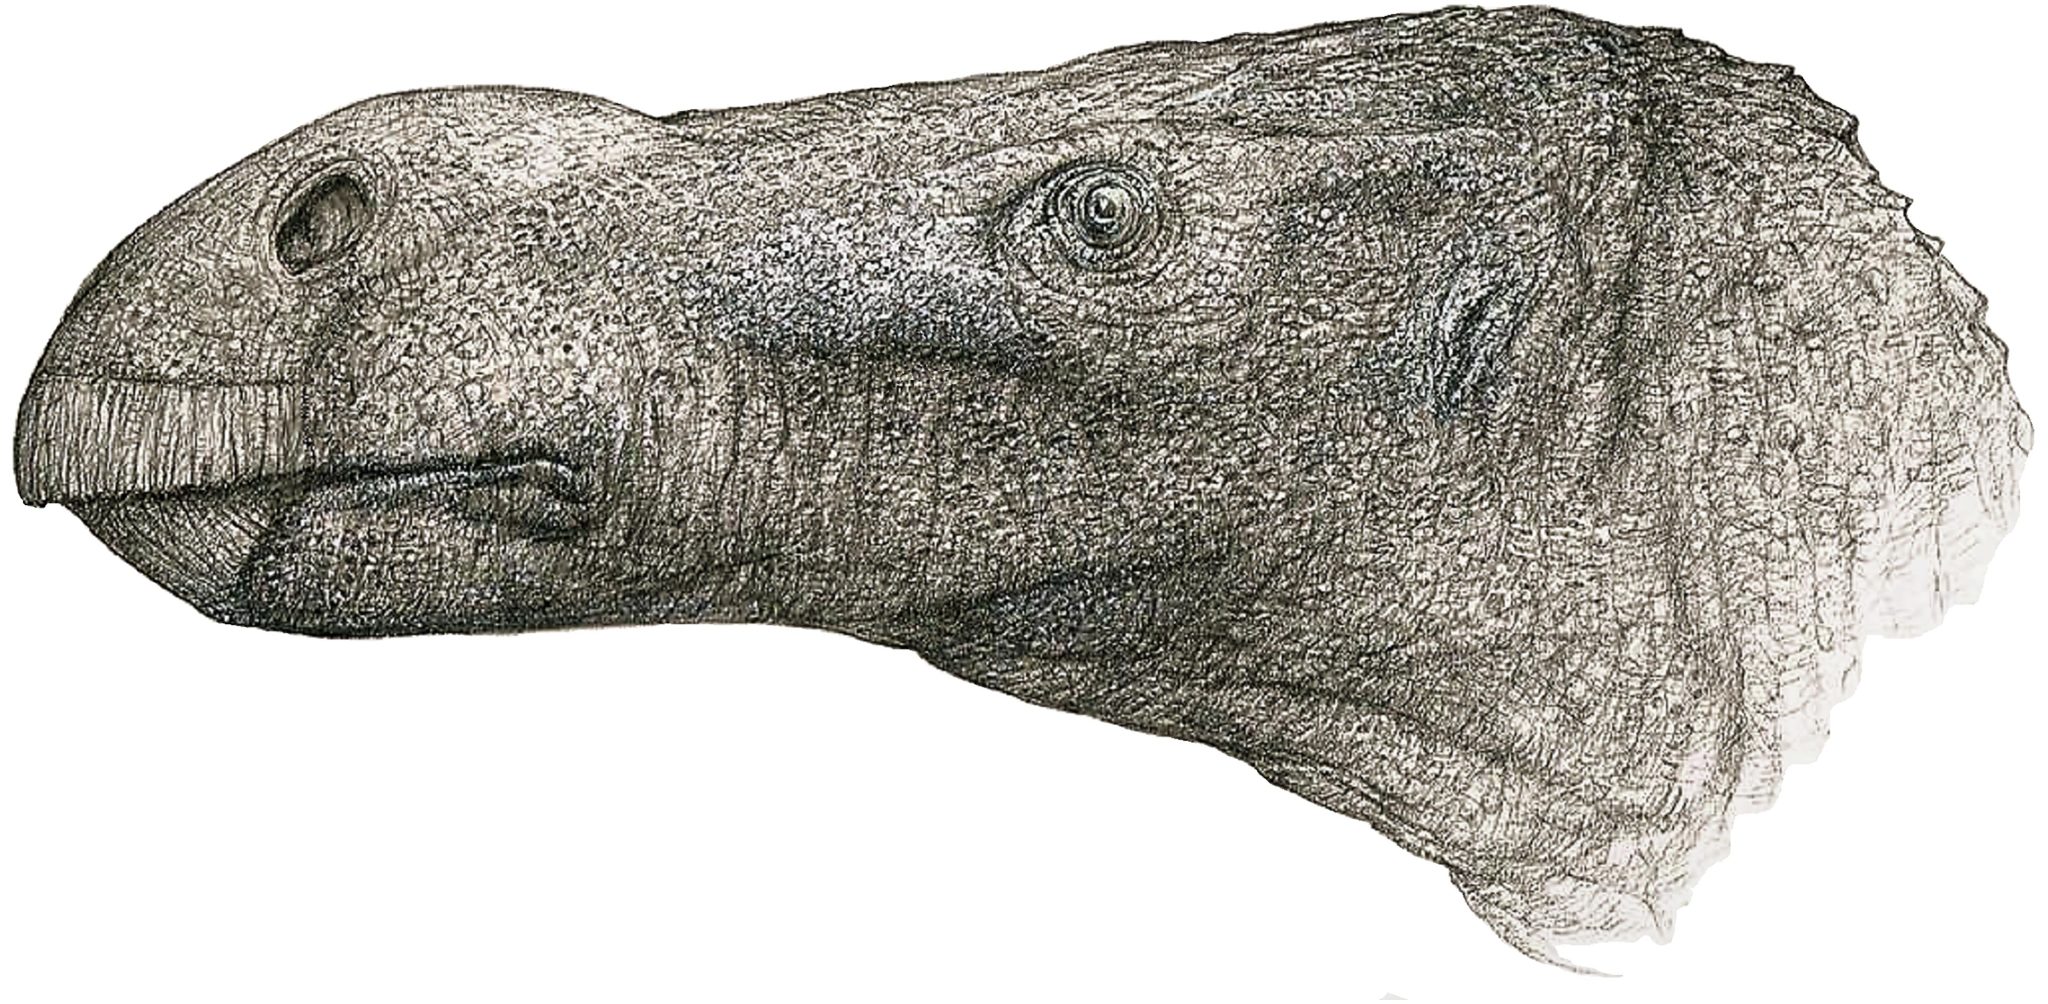 New Species of Iguanodontian Dinosaur Discovered on Isle of Wight